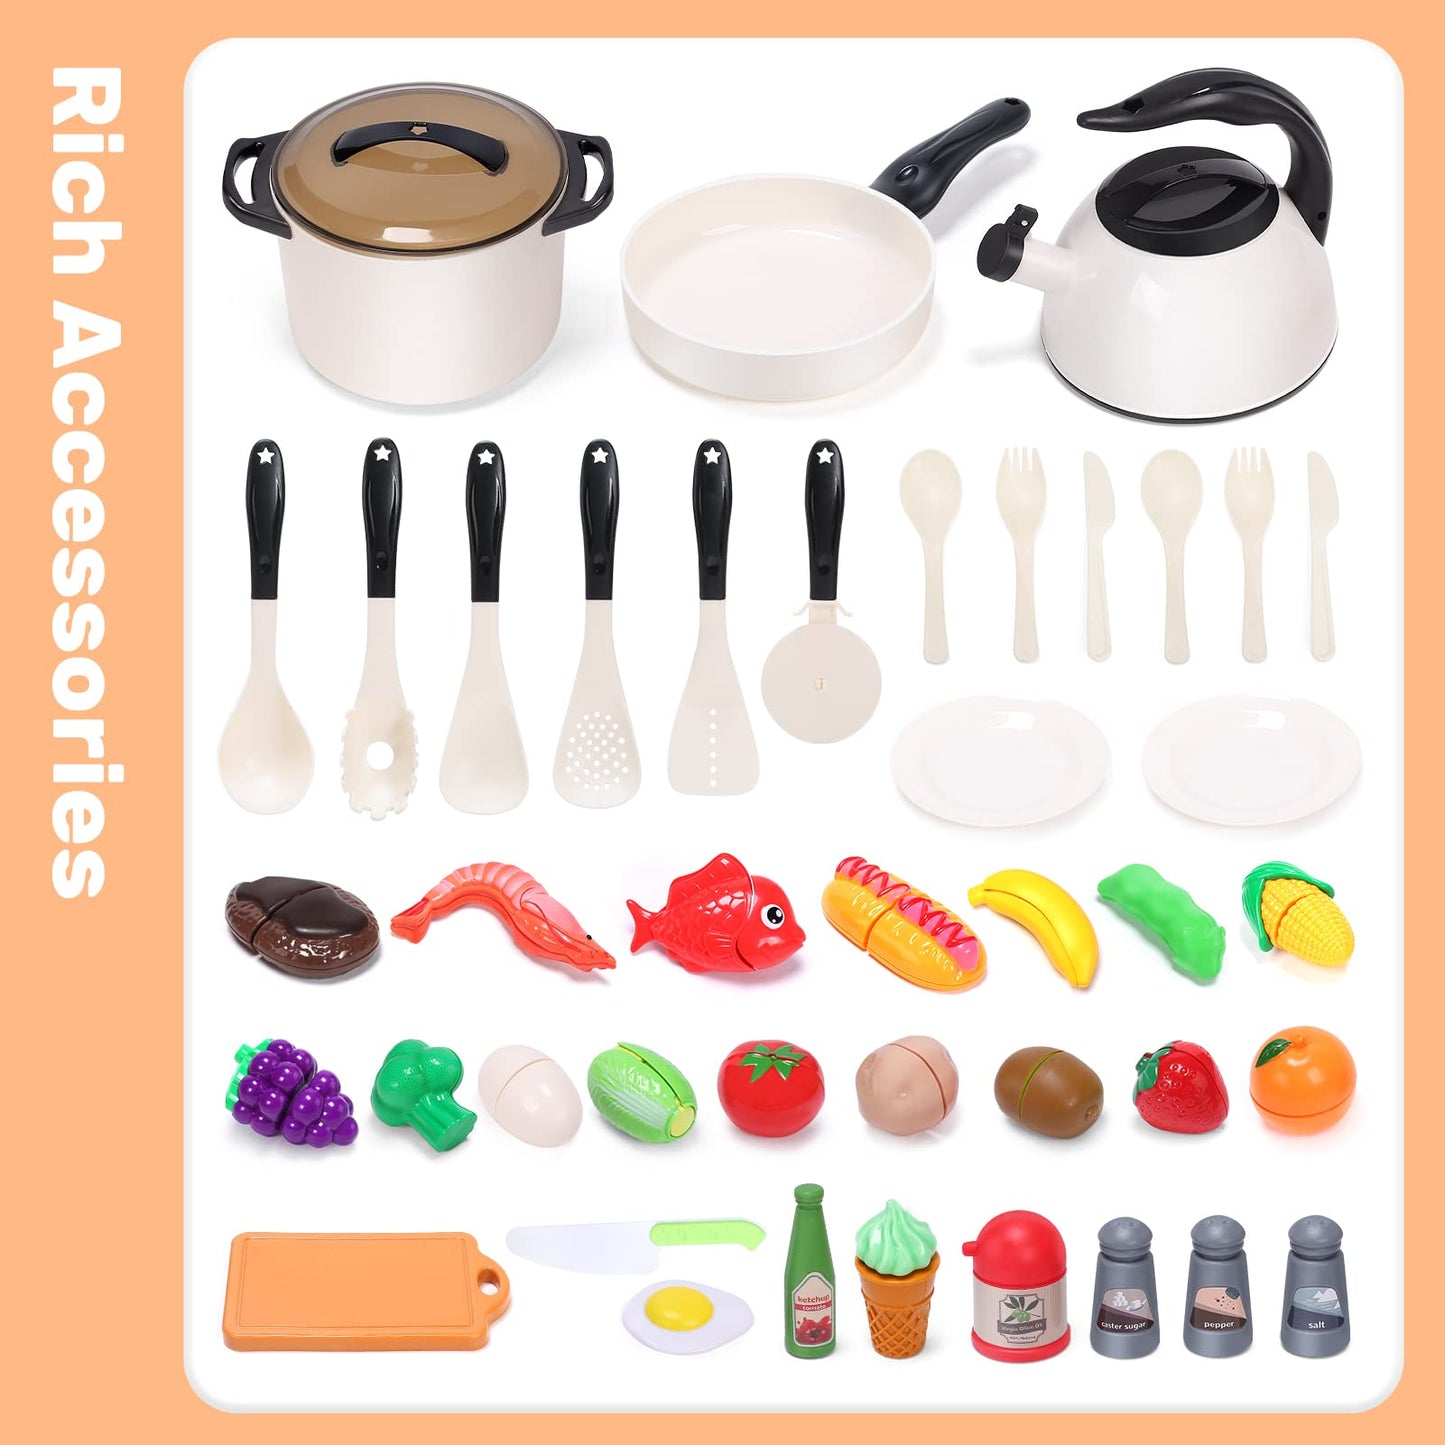 CUTE STONE Play Kitchen Accessories Toy, Play Food Sets for Kids Kitchen, Toddler Kitchen Set for Kids with Play Pots, Pans